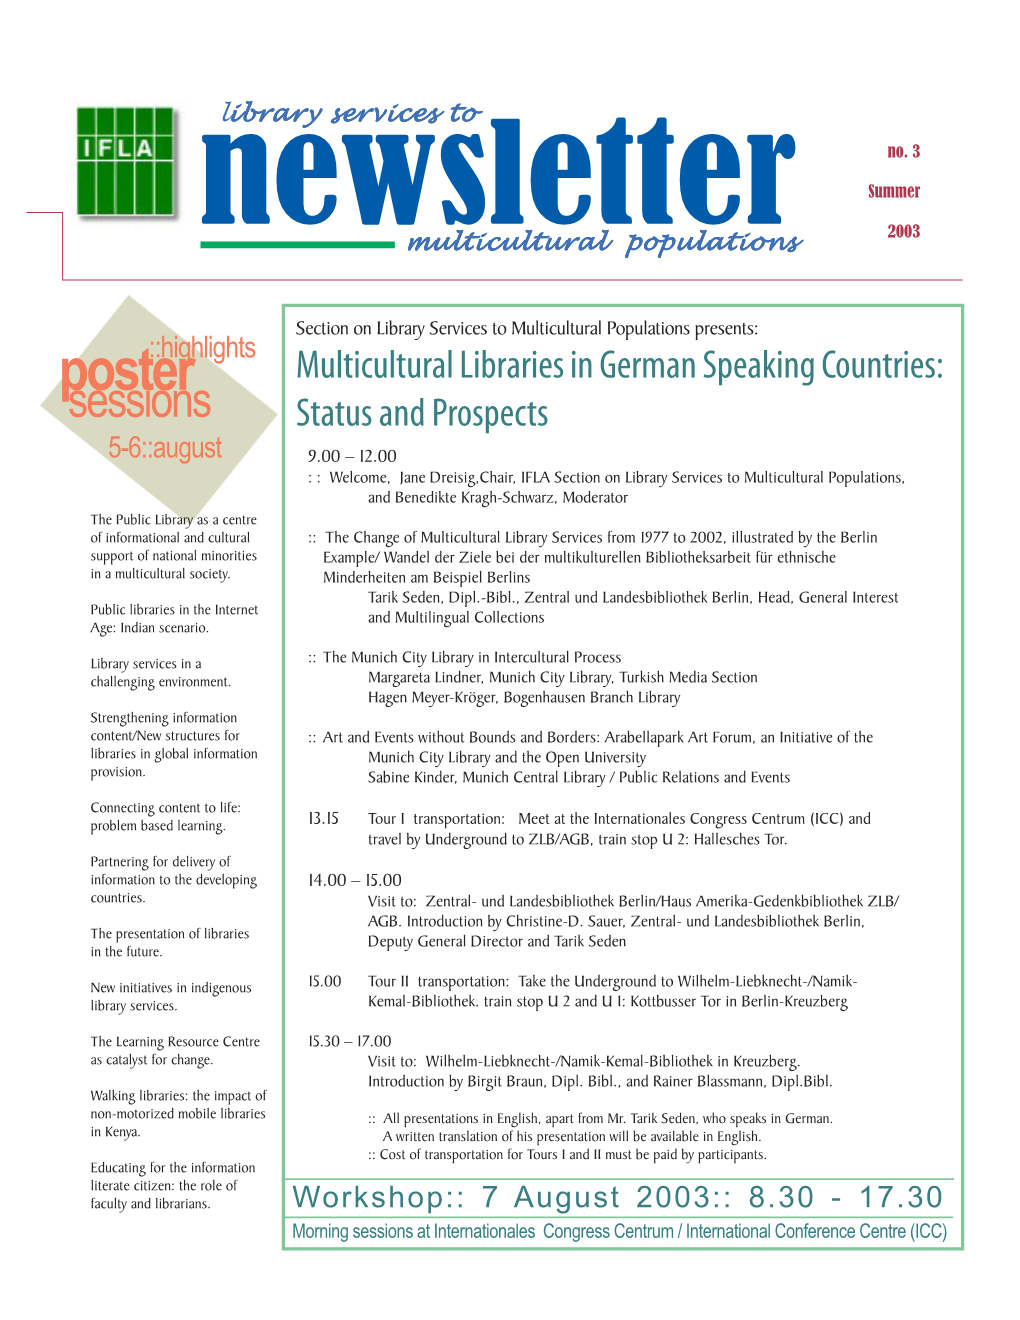 Library Services to Multicultural Populations Newsletter